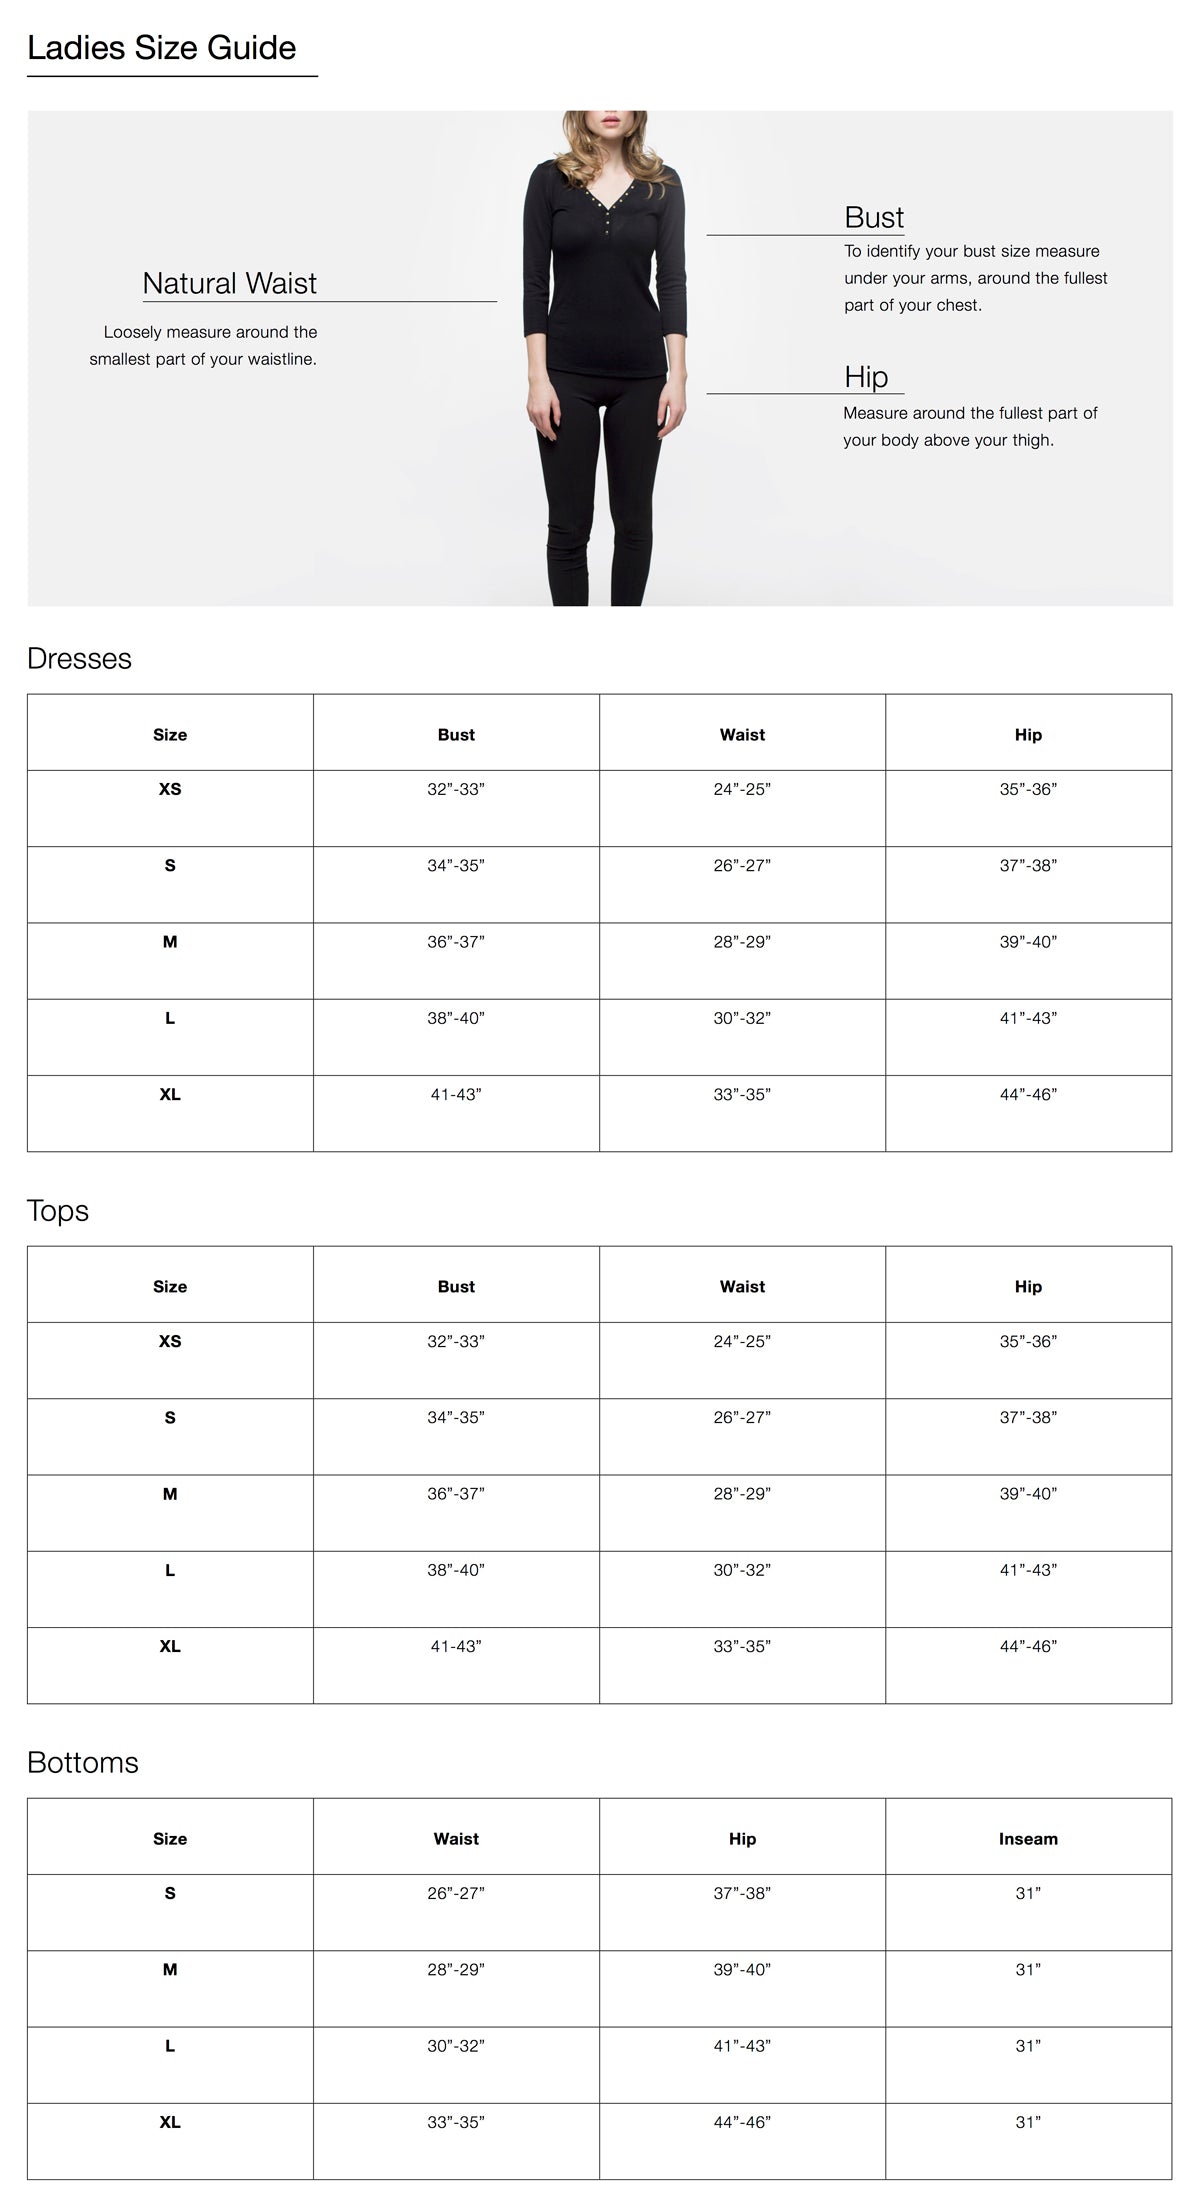 Big And Suit Size Chart